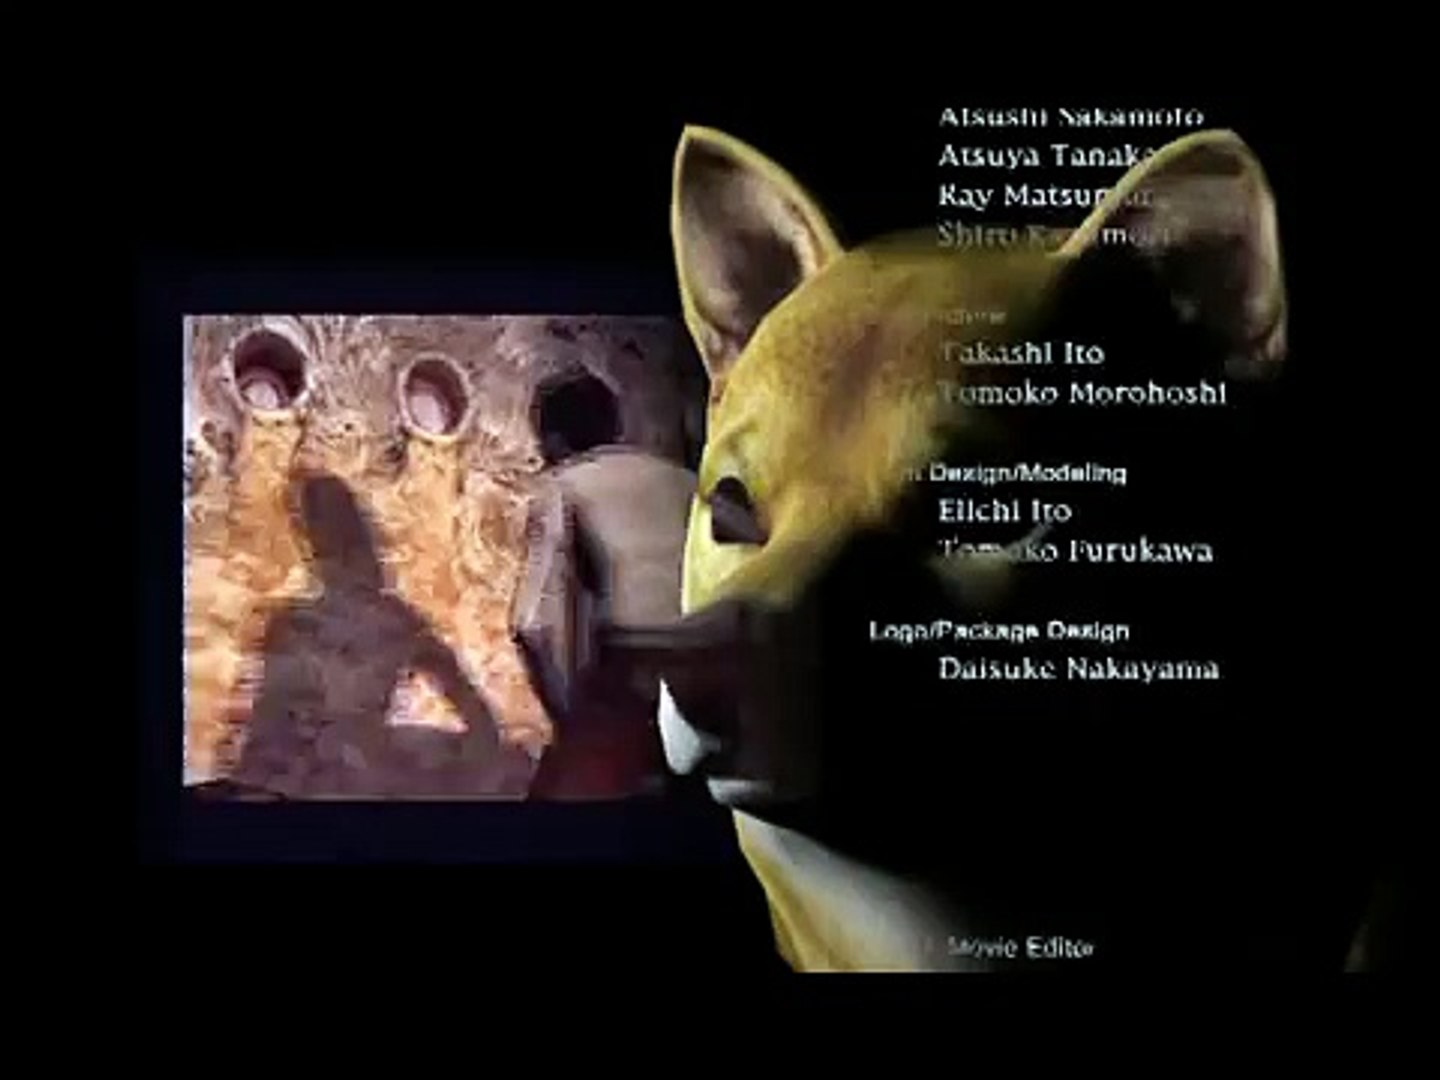 Silent Hill 2 Dog Ending Credits Song Hq Video Dailymotion